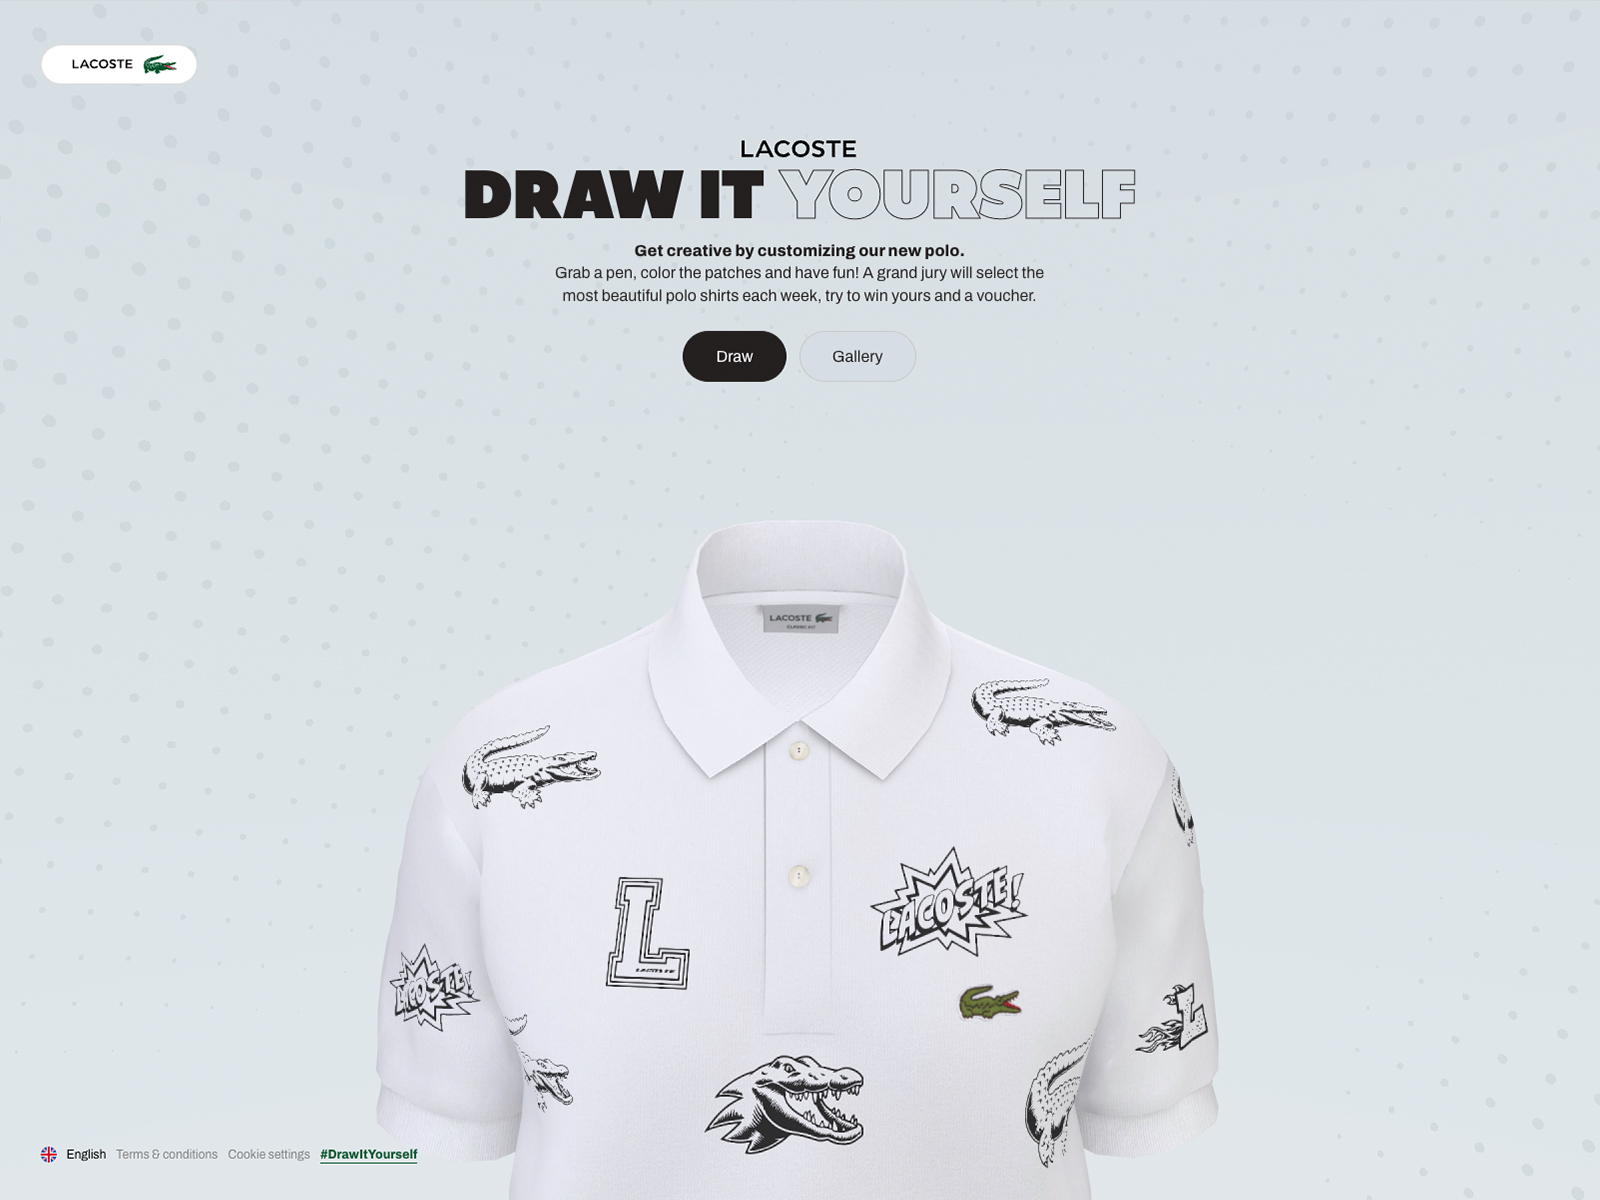 Lacoste - Draw It Yourself